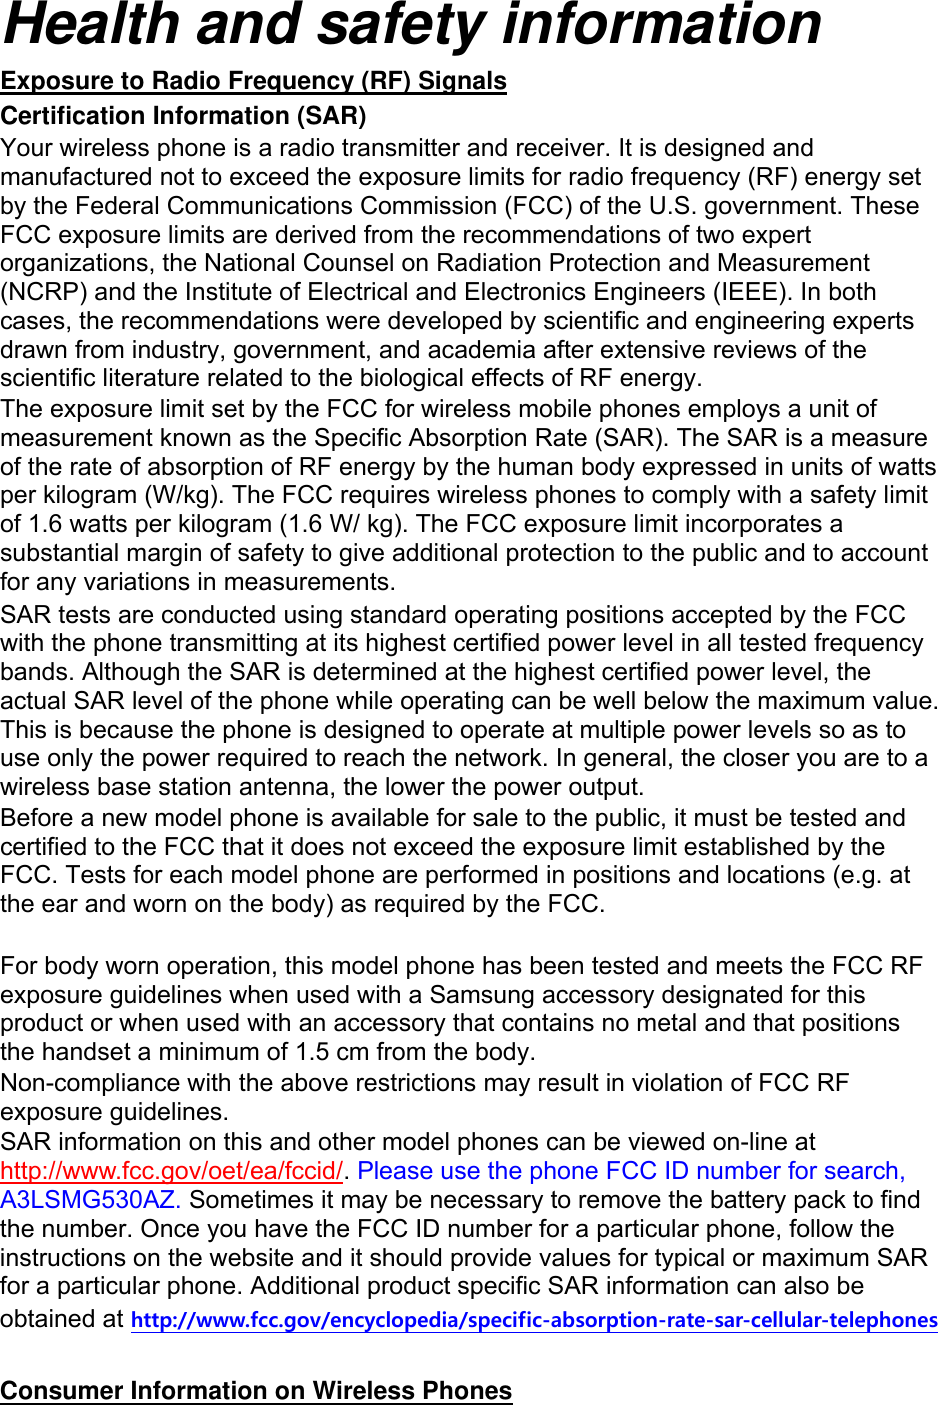 Health and safety information Exposure to Radio Frequency (RF) Signals Certification Information (SAR) Your wireless phone is a radio transmitter and receiver. It is designed and manufactured not to exceed the exposure limits for radio frequency (RF) energy set by the Federal Communications Commission (FCC) of the U.S. government. These FCC exposure limits are derived from the recommendations of two expert organizations, the National Counsel on Radiation Protection and Measurement (NCRP) and the Institute of Electrical and Electronics Engineers (IEEE). In both cases, the recommendations were developed by scientific and engineering experts drawn from industry, government, and academia after extensive reviews of the scientific literature related to the biological effects of RF energy. The exposure limit set by the FCC for wireless mobile phones employs a unit of measurement known as the Specific Absorption Rate (SAR). The SAR is a measure of the rate of absorption of RF energy by the human body expressed in units of watts per kilogram (W/kg). The FCC requires wireless phones to comply with a safety limit of 1.6 watts per kilogram (1.6 W/ kg). The FCC exposure limit incorporates a substantial margin of safety to give additional protection to the public and to account for any variations in measurements. SAR tests are conducted using standard operating positions accepted by the FCC with the phone transmitting at its highest certified power level in all tested frequency bands. Although the SAR is determined at the highest certified power level, the actual SAR level of the phone while operating can be well below the maximum value. This is because the phone is designed to operate at multiple power levels so as to use only the power required to reach the network. In general, the closer you are to a wireless base station antenna, the lower the power output. Before a new model phone is available for sale to the public, it must be tested and certified to the FCC that it does not exceed the exposure limit established by the FCC. Tests for each model phone are performed in positions and locations (e.g. at the ear and worn on the body) as required by the FCC.      For body worn operation, this model phone has been tested and meets the FCC RF exposure guidelines when used with a Samsung accessory designated for this product or when used with an accessory that contains no metal and that positions the handset a minimum of 1.5 cm from the body.   Non-compliance with the above restrictions may result in violation of FCC RF exposure guidelines. SAR information on this and other model phones can be viewed on-line at http://www.fcc.gov/oet/ea/fccid/. Please use the phone FCC ID number for search, A3LSMG530AZ. Sometimes it may be necessary to remove the battery pack to find the number. Once you have the FCC ID number for a particular phone, follow the instructions on the website and it should provide values for typical or maximum SAR for a particular phone. Additional product specific SAR information can also be obtained at http://www.fcc.gov/encyclopedia/specific-absorption-rate-sar-cellular-telephones  Consumer Information on Wireless Phones 